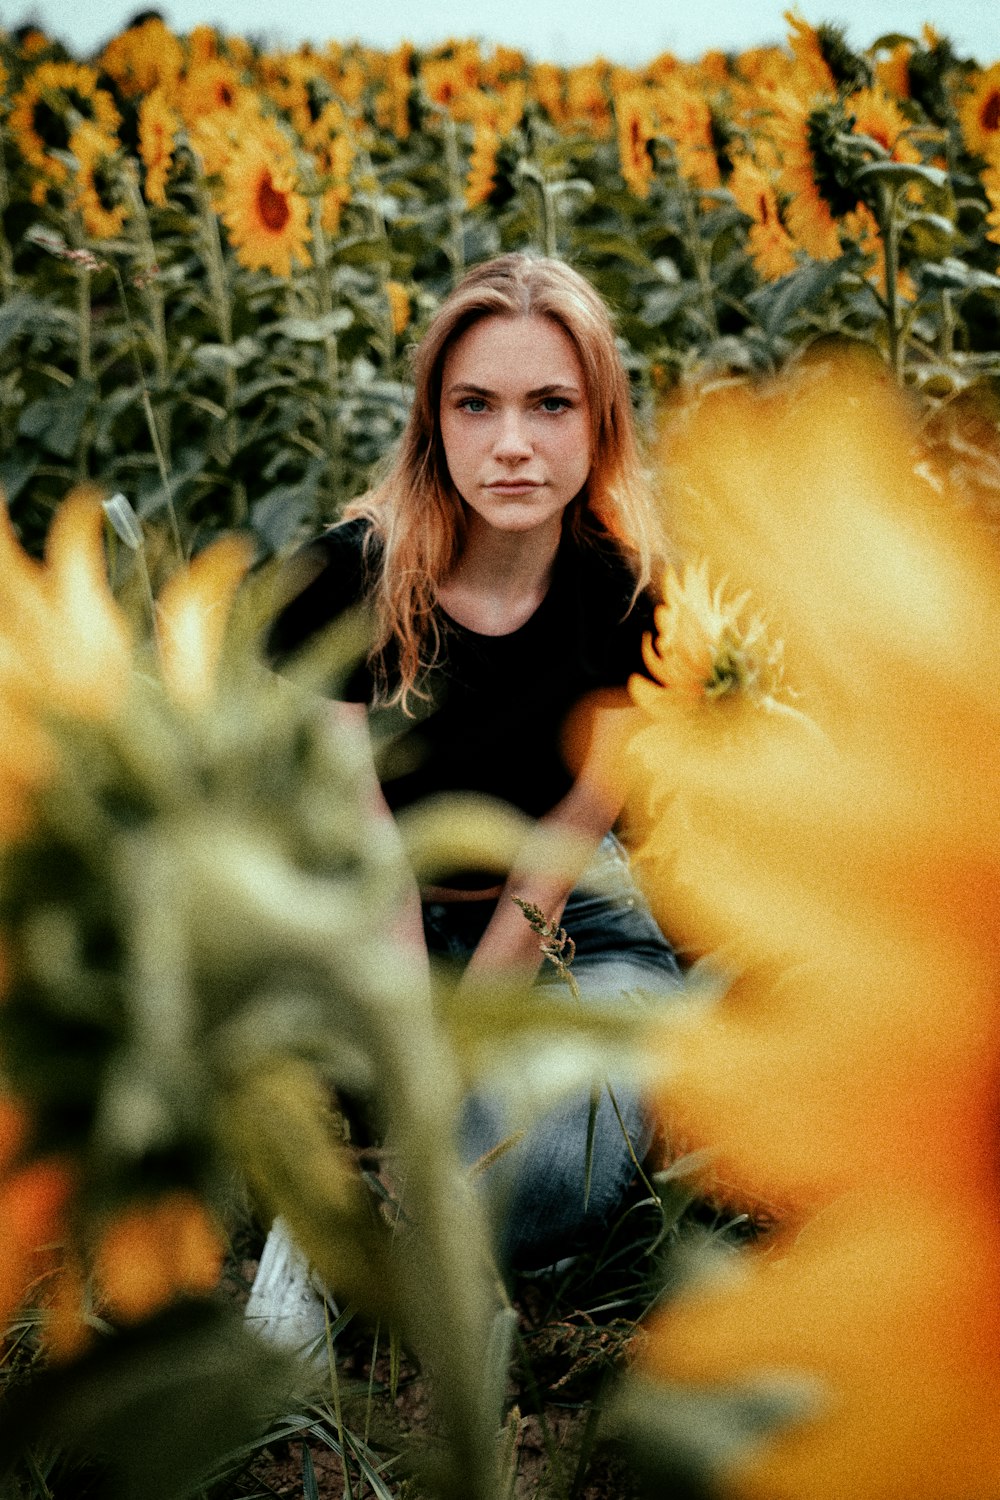 woman in black shirt sitting on yellow flower field during daytime